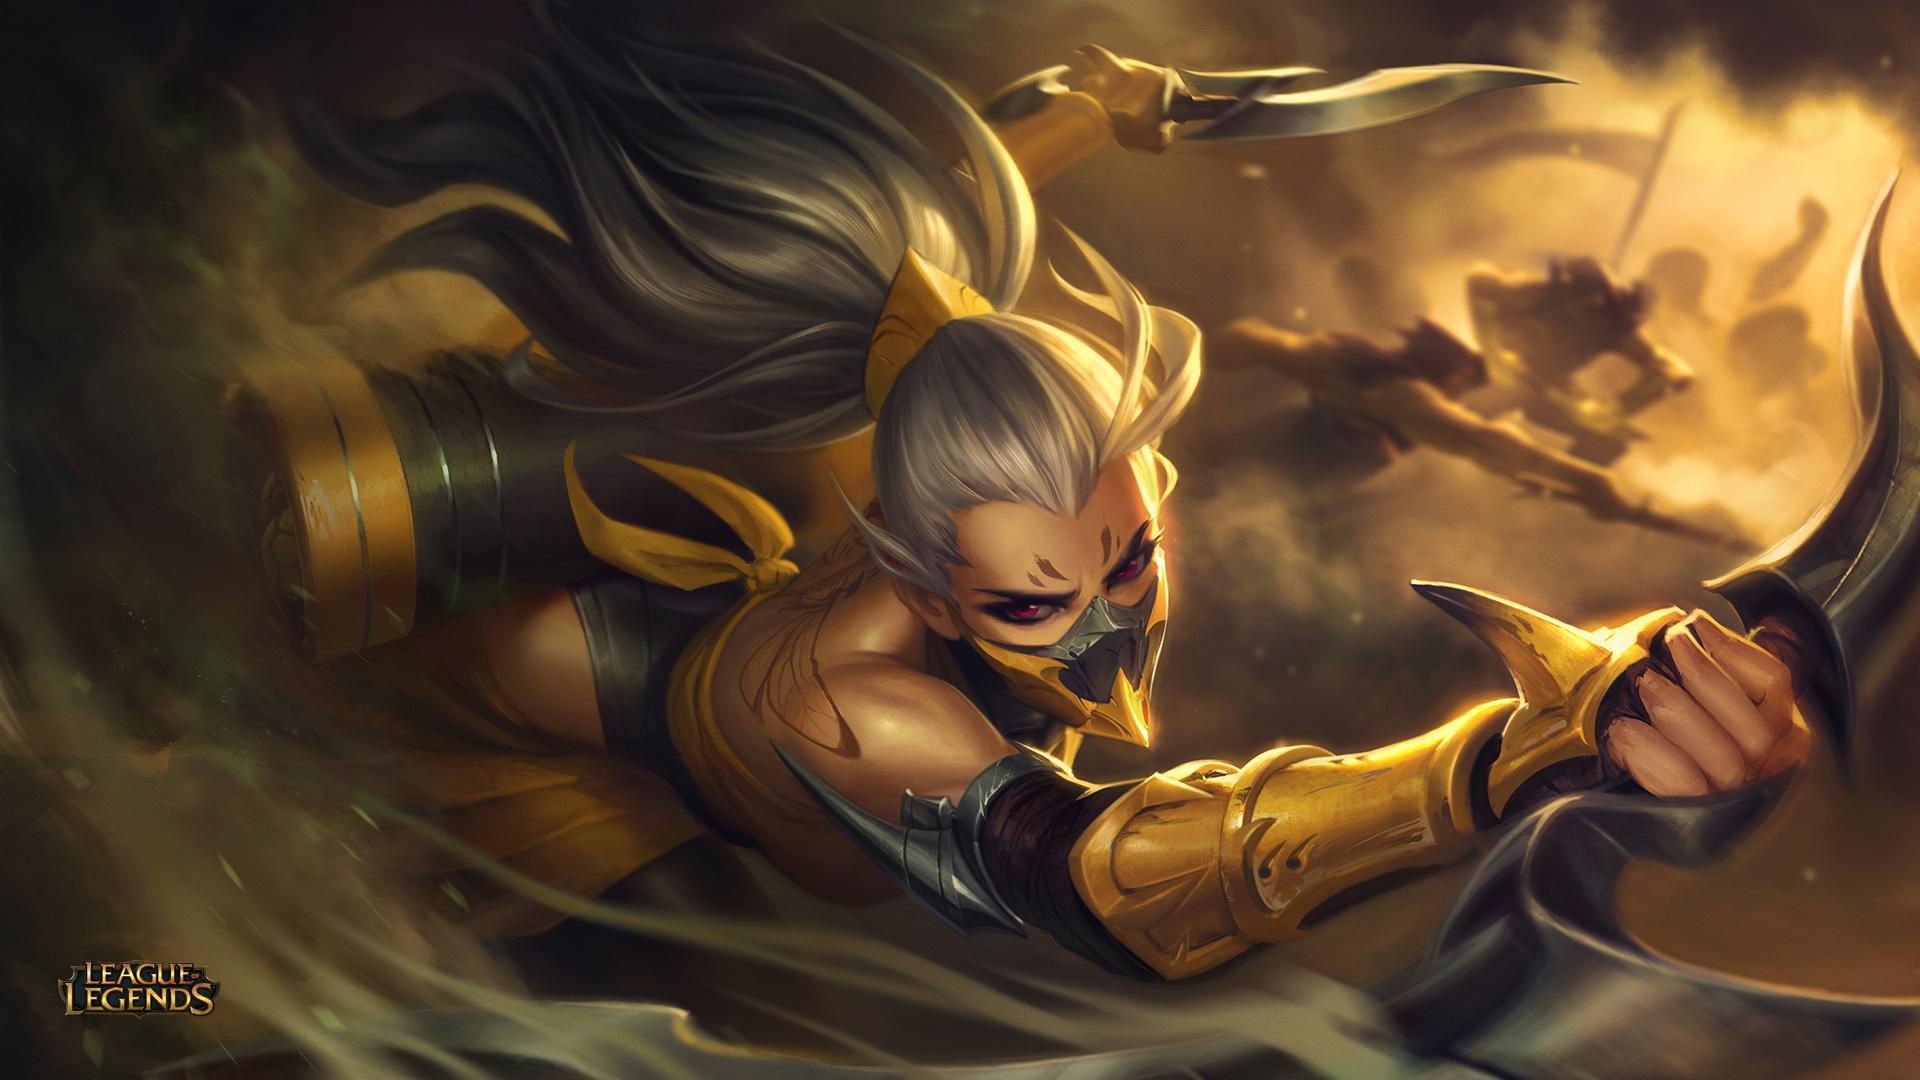 The New Akali splashes are hands down some of your best